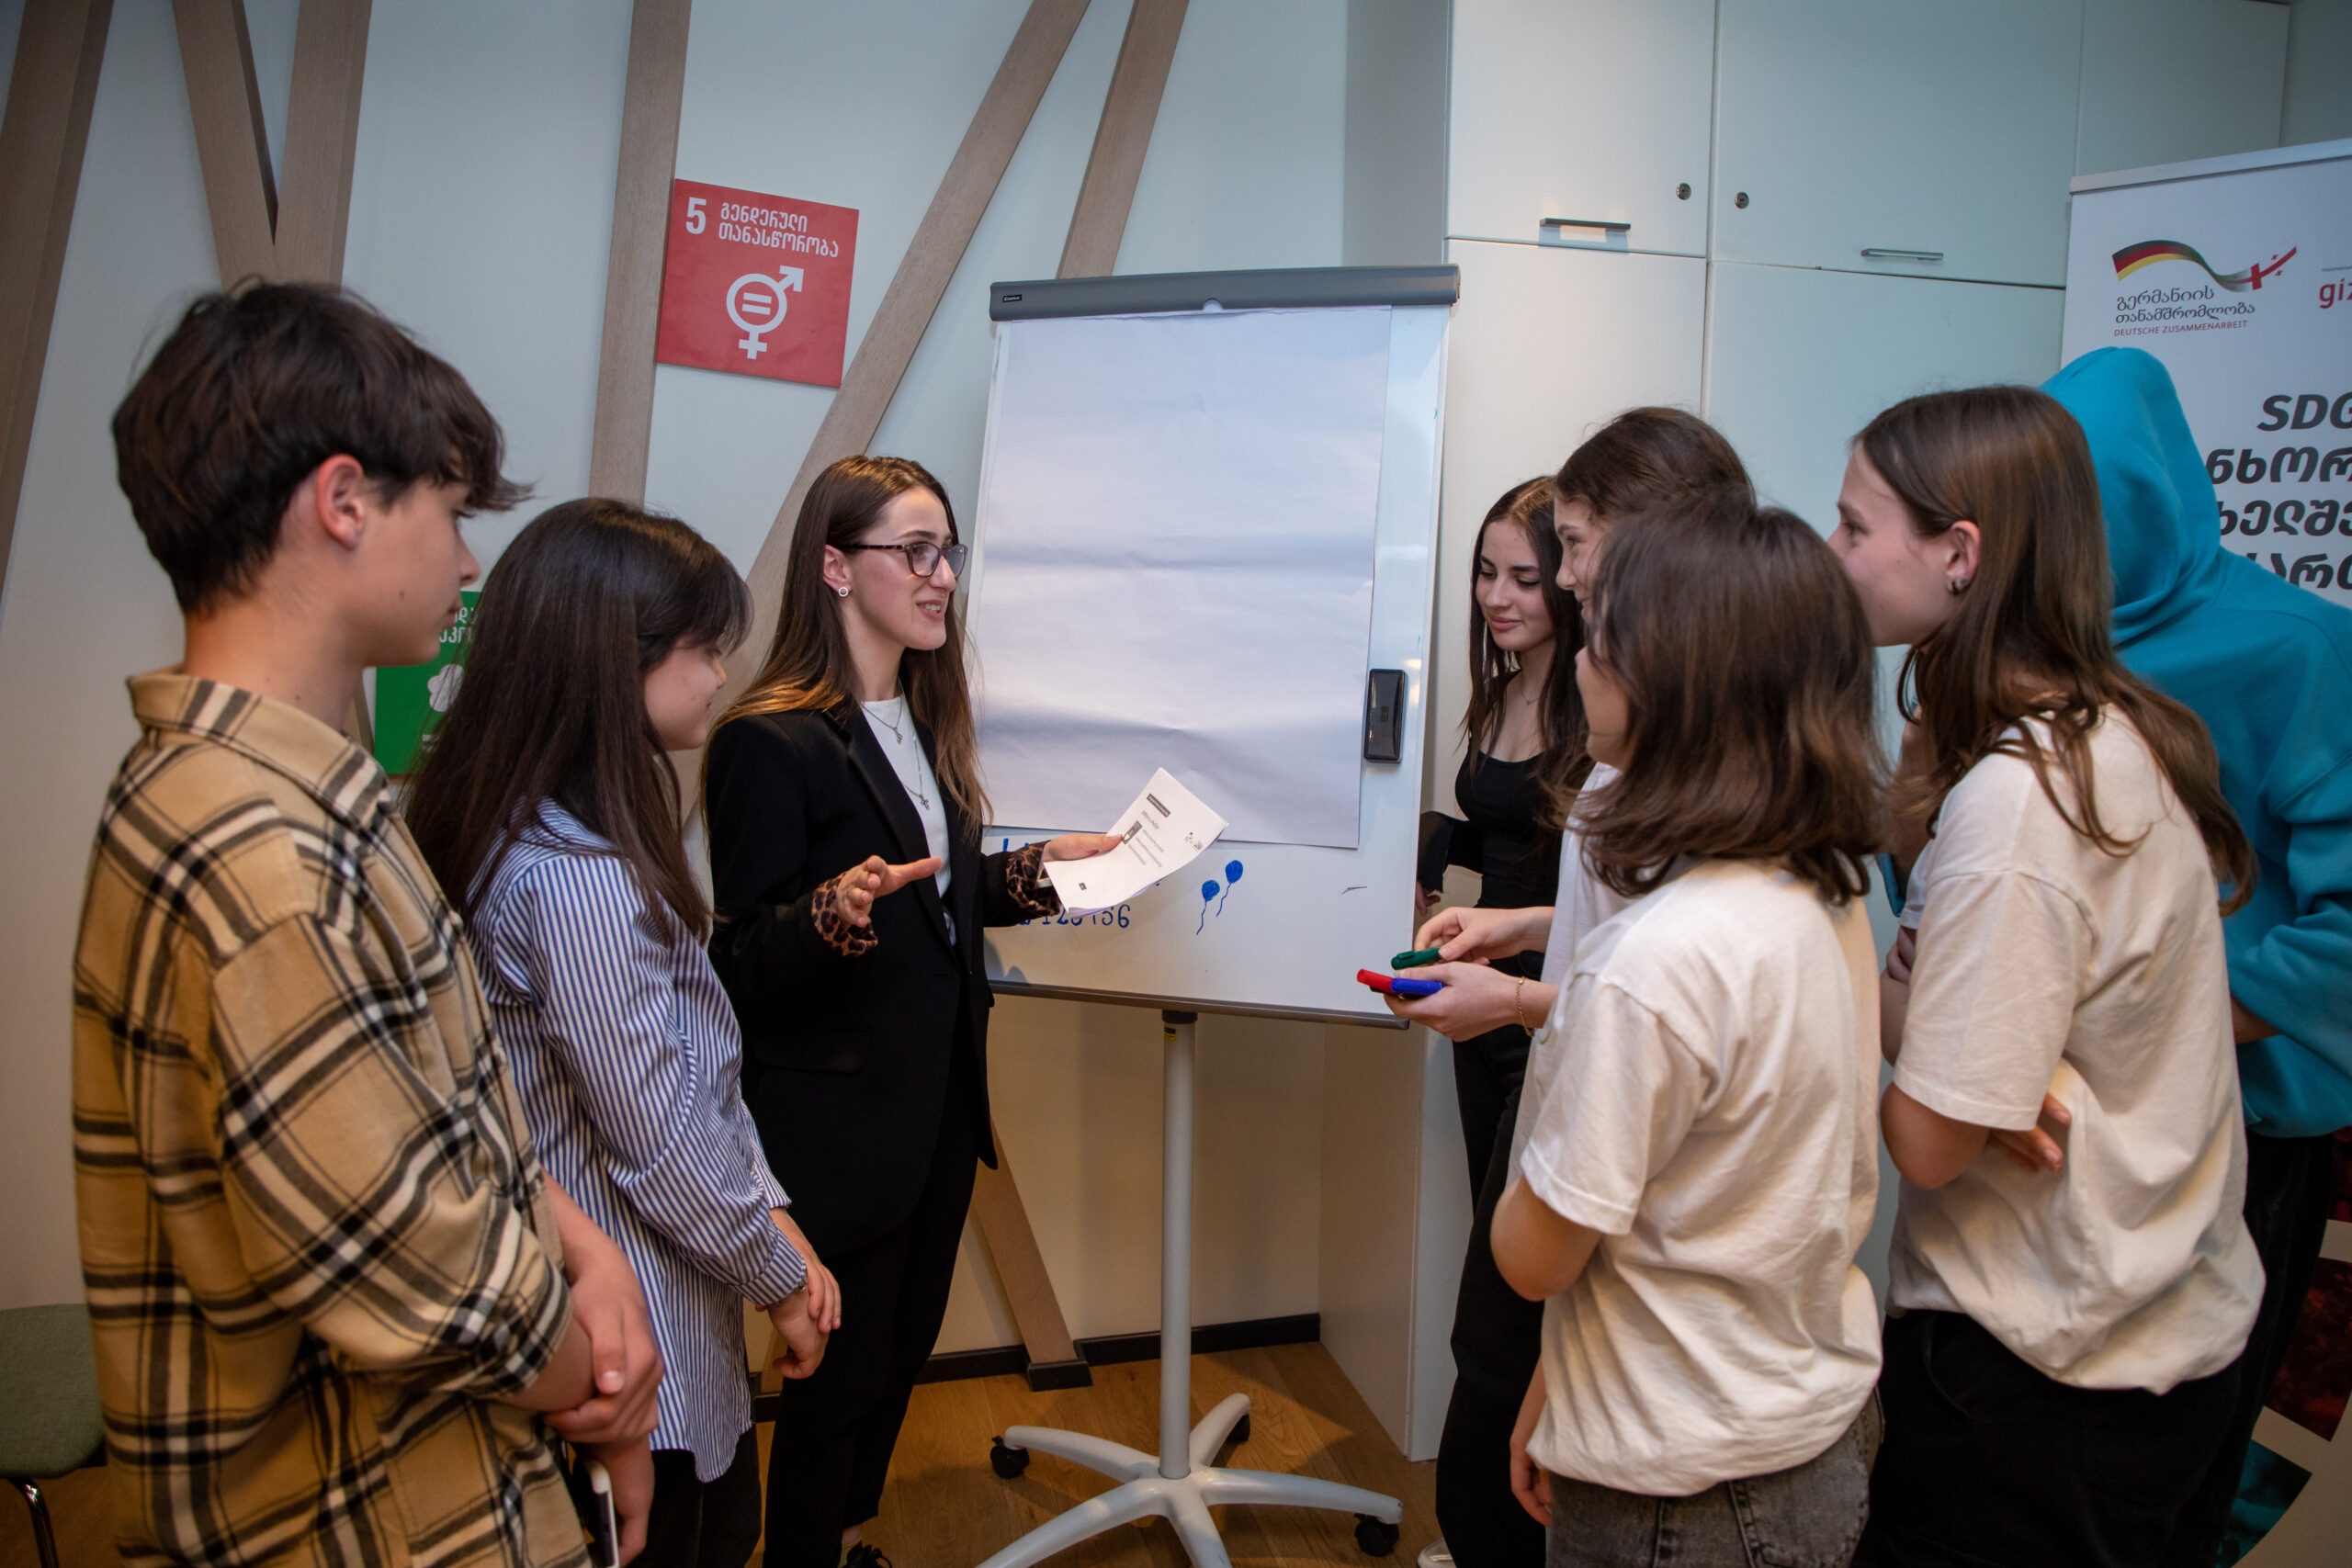 CENN, with the support of the German government, held information campaigns on sustainable development goals in 5 municipalities for up to 250 youth and civil society representatives